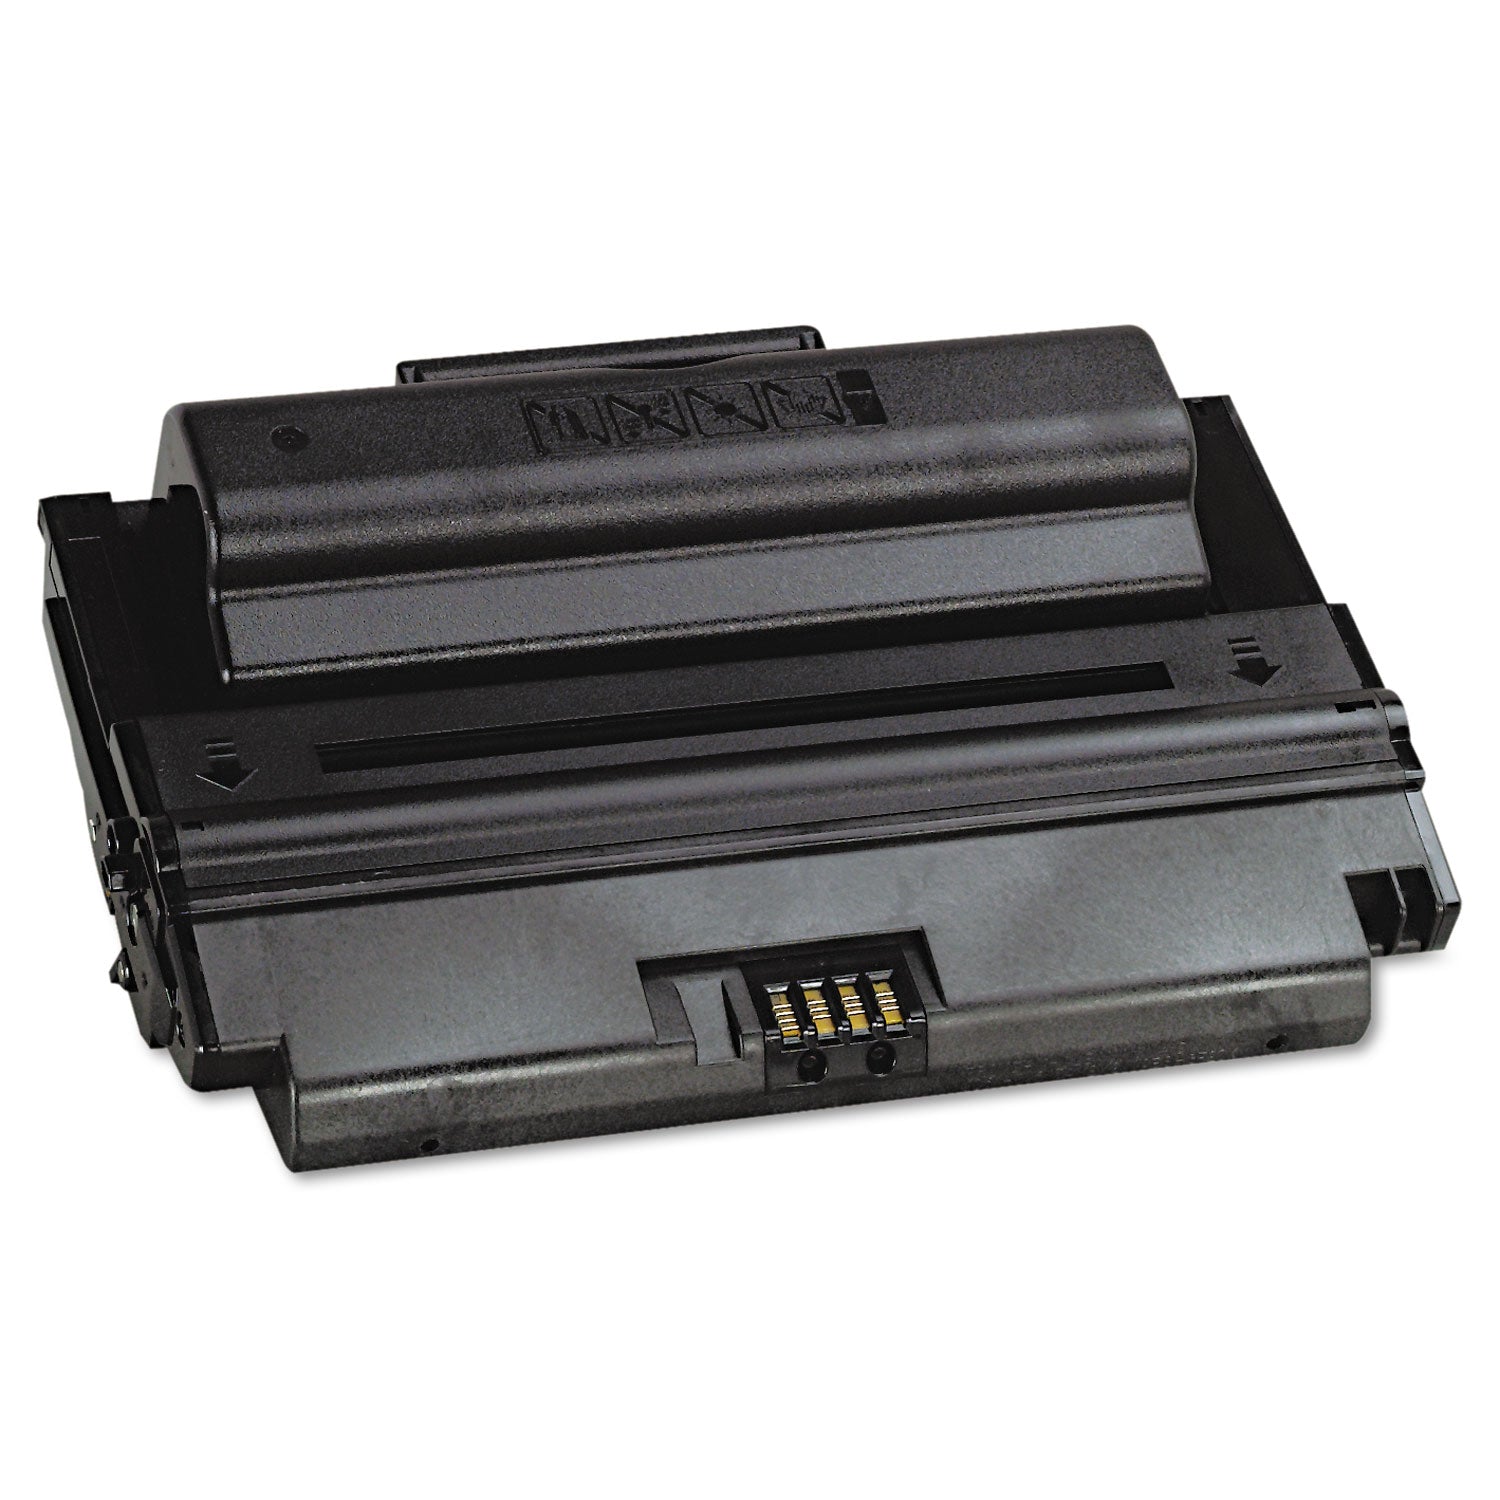 108R00795 High-Yield Toner, 10,000 Page-Yield, Black - 